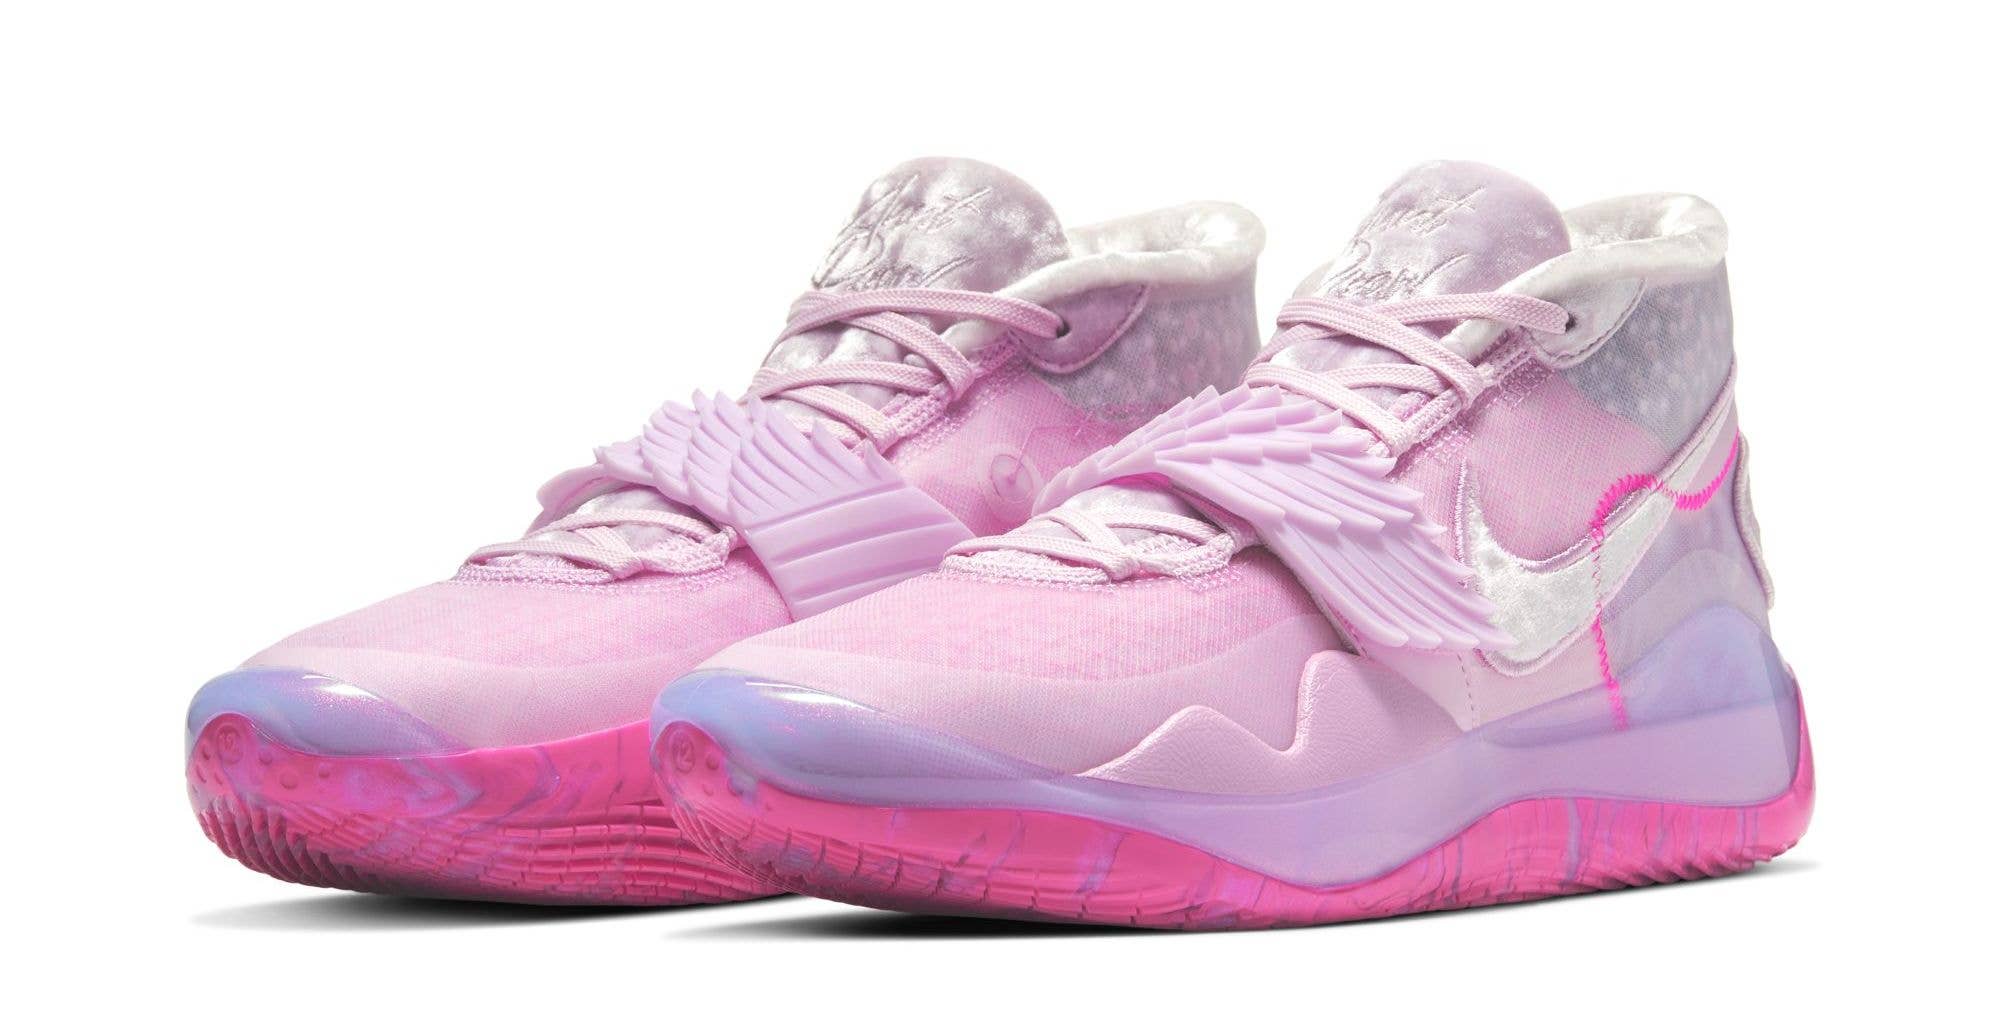 Propuesta completar Inevitable Nike Confirms Release Date for the 'Aunt Pearl' KD 12 | Complex